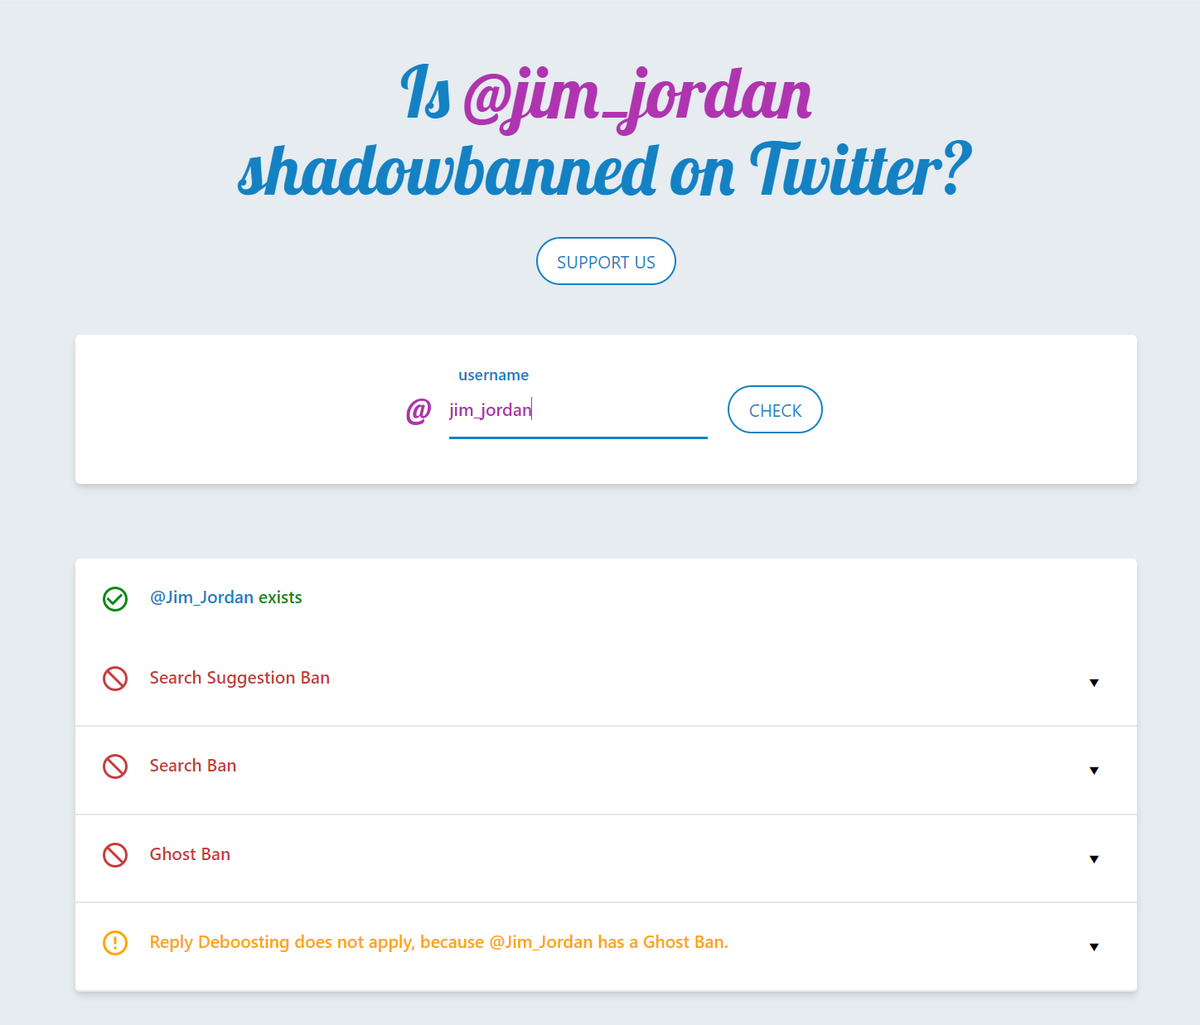 Update, JudiciaryGOP isn't locked out of their account anymore and they are no longer ghost banned. Jim Jordan is still locked out and still ghost banned. Looks like Twitter ghost banned accounts they locked out after the hack.